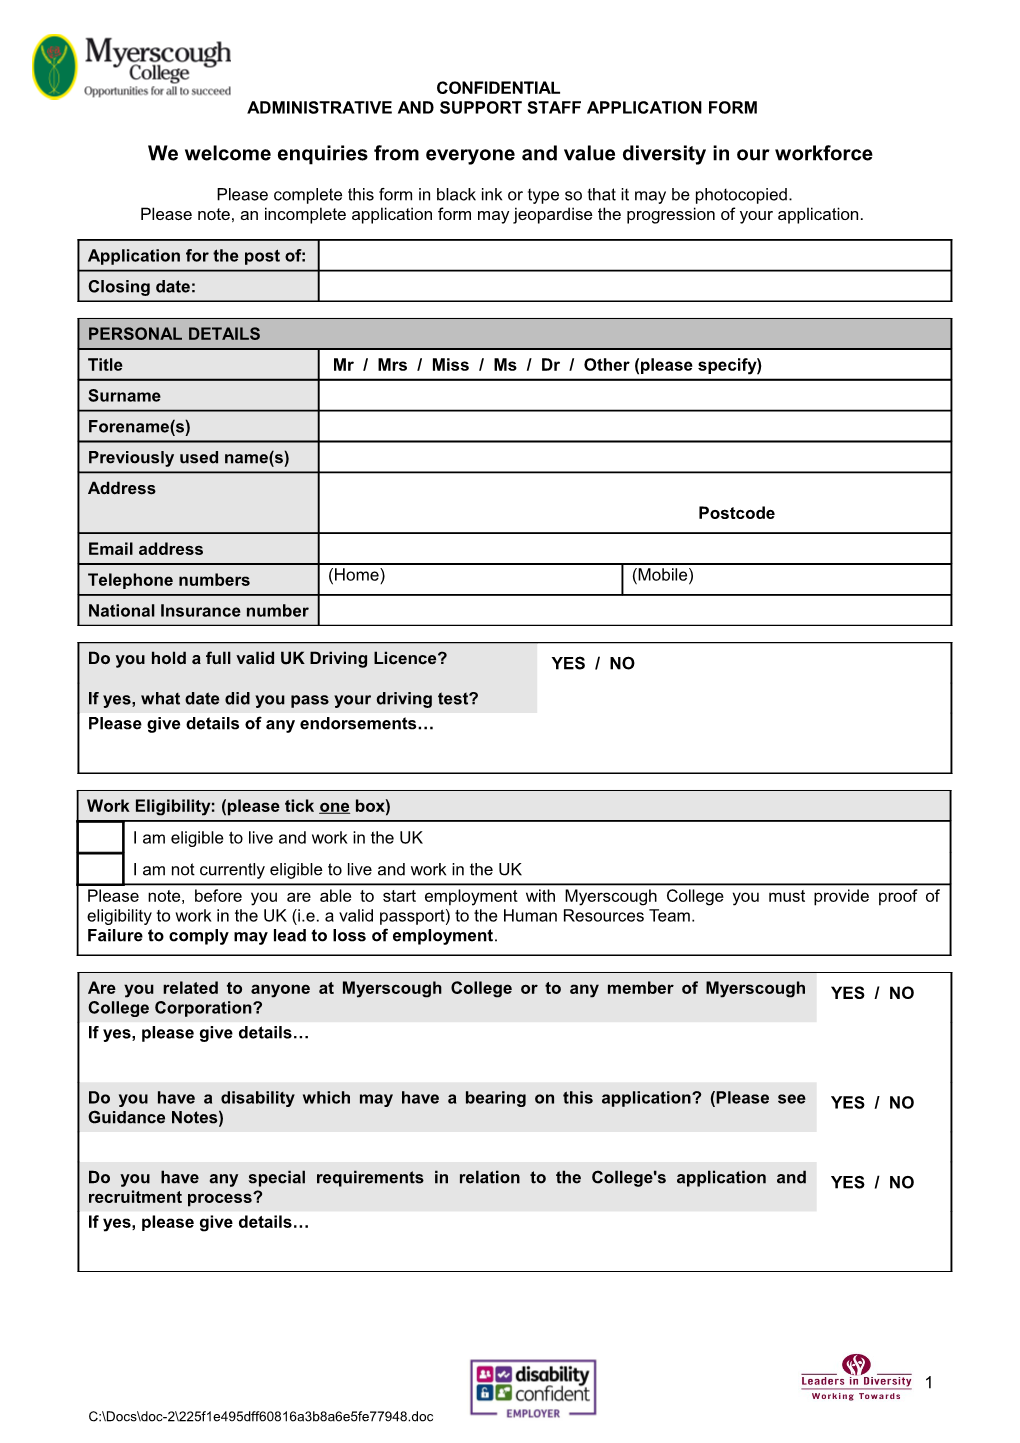 Administrative and Support Staff Application Form